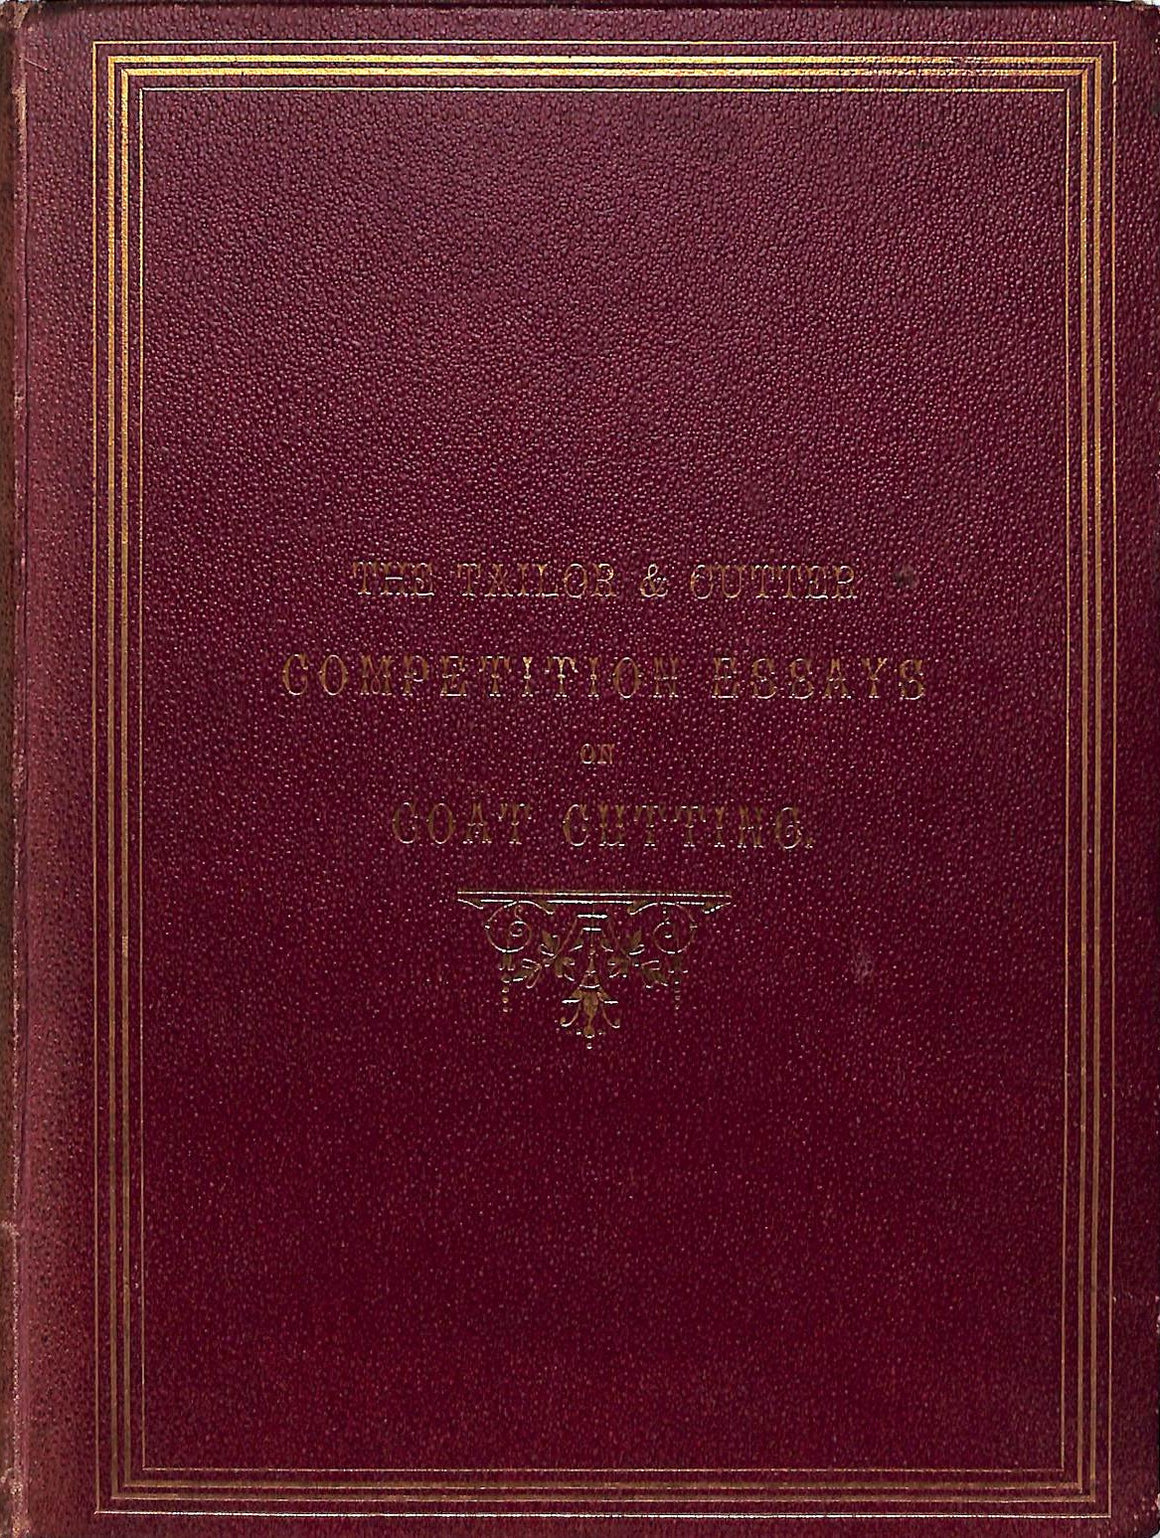 The Tailor & Cutter Competition Essays on Coat Cutting